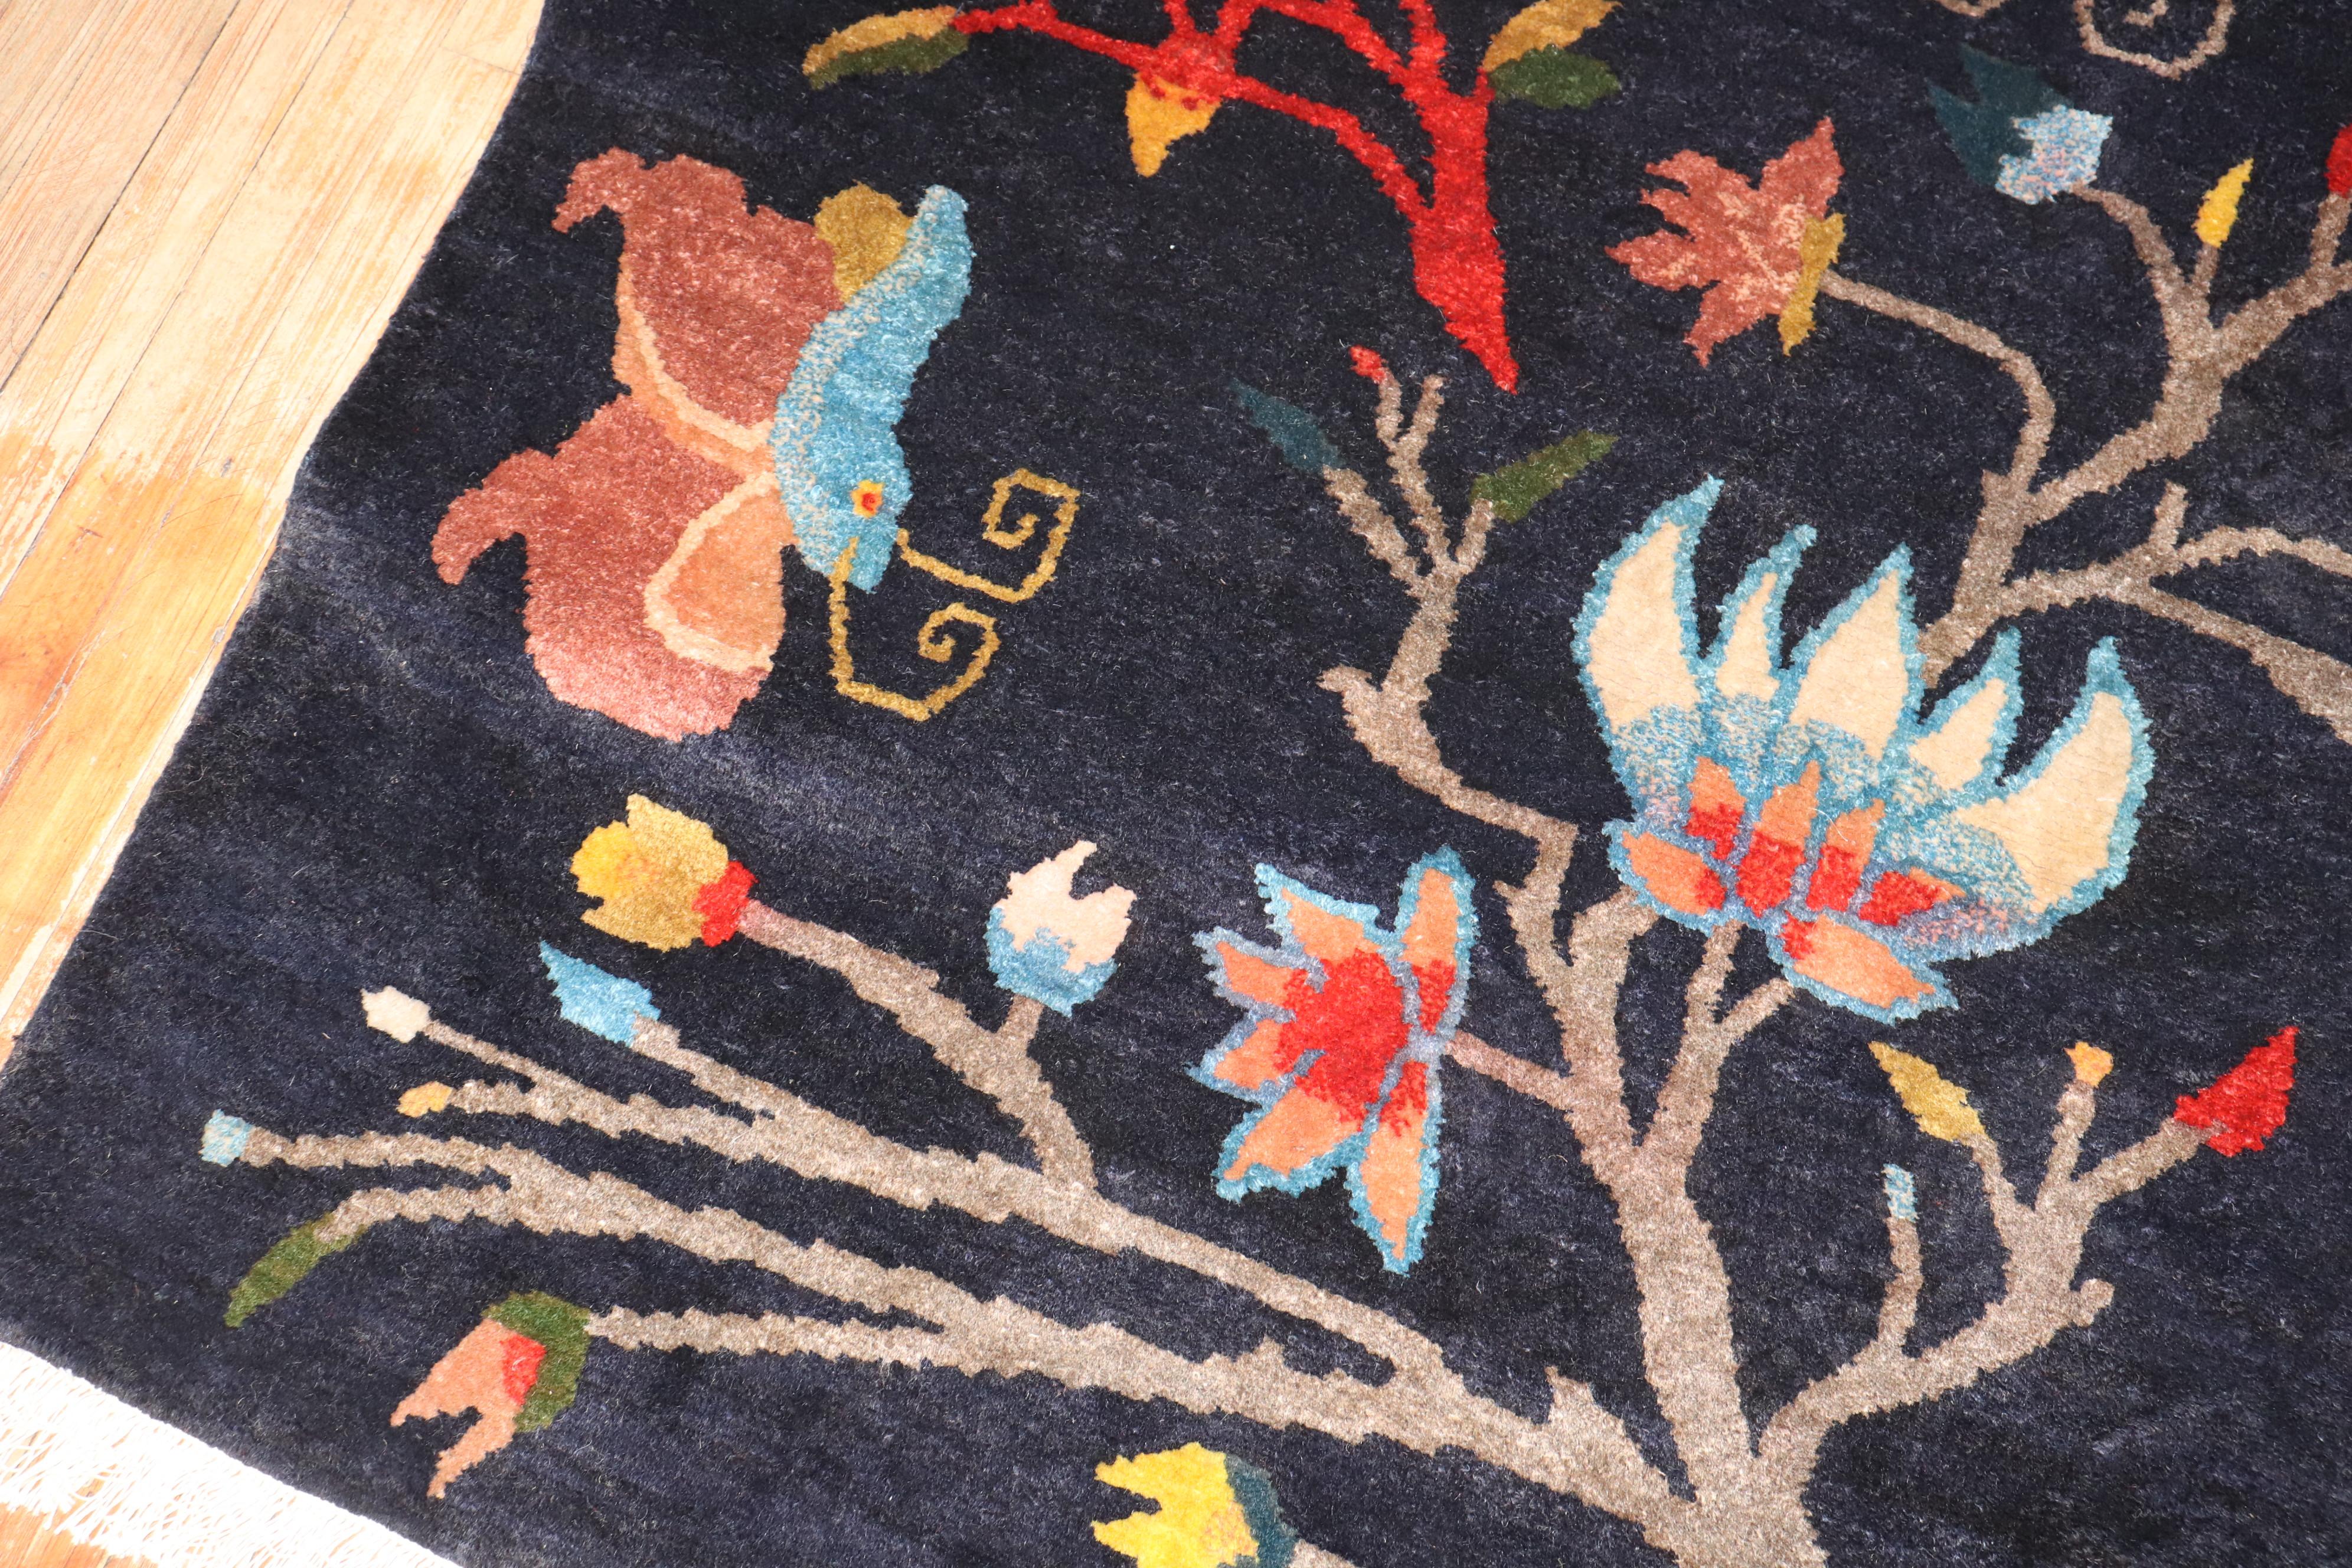 accent-size floral Tibetan rug from the 3rd quarter of the 20th century

Details
rug no.	j3565
size	4' 8